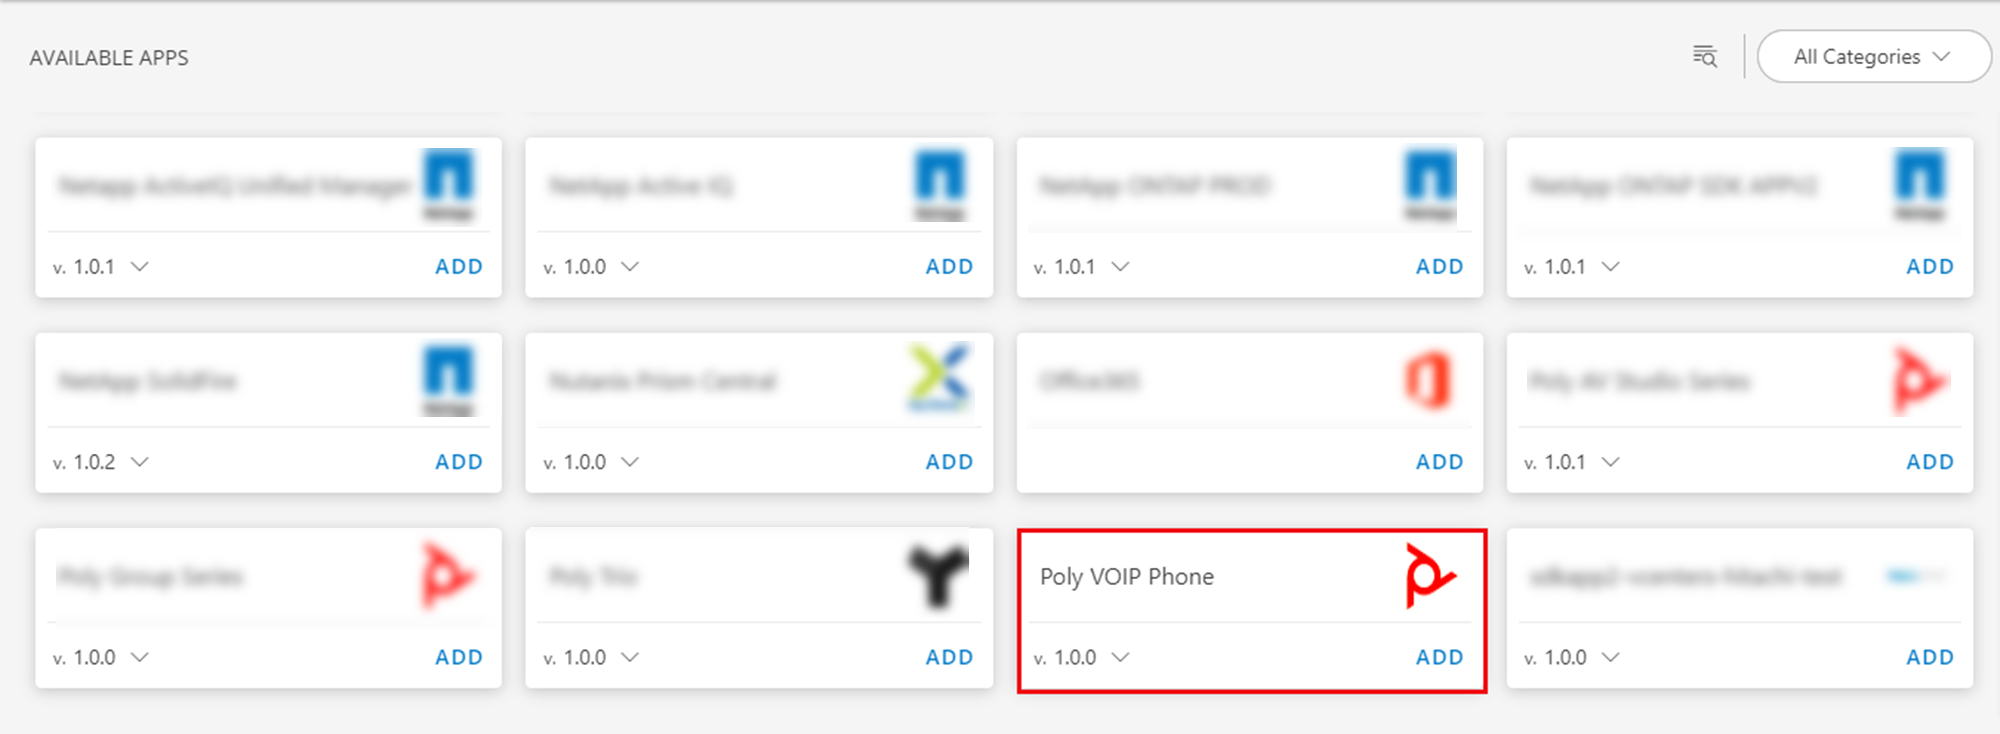 Poly VoIP